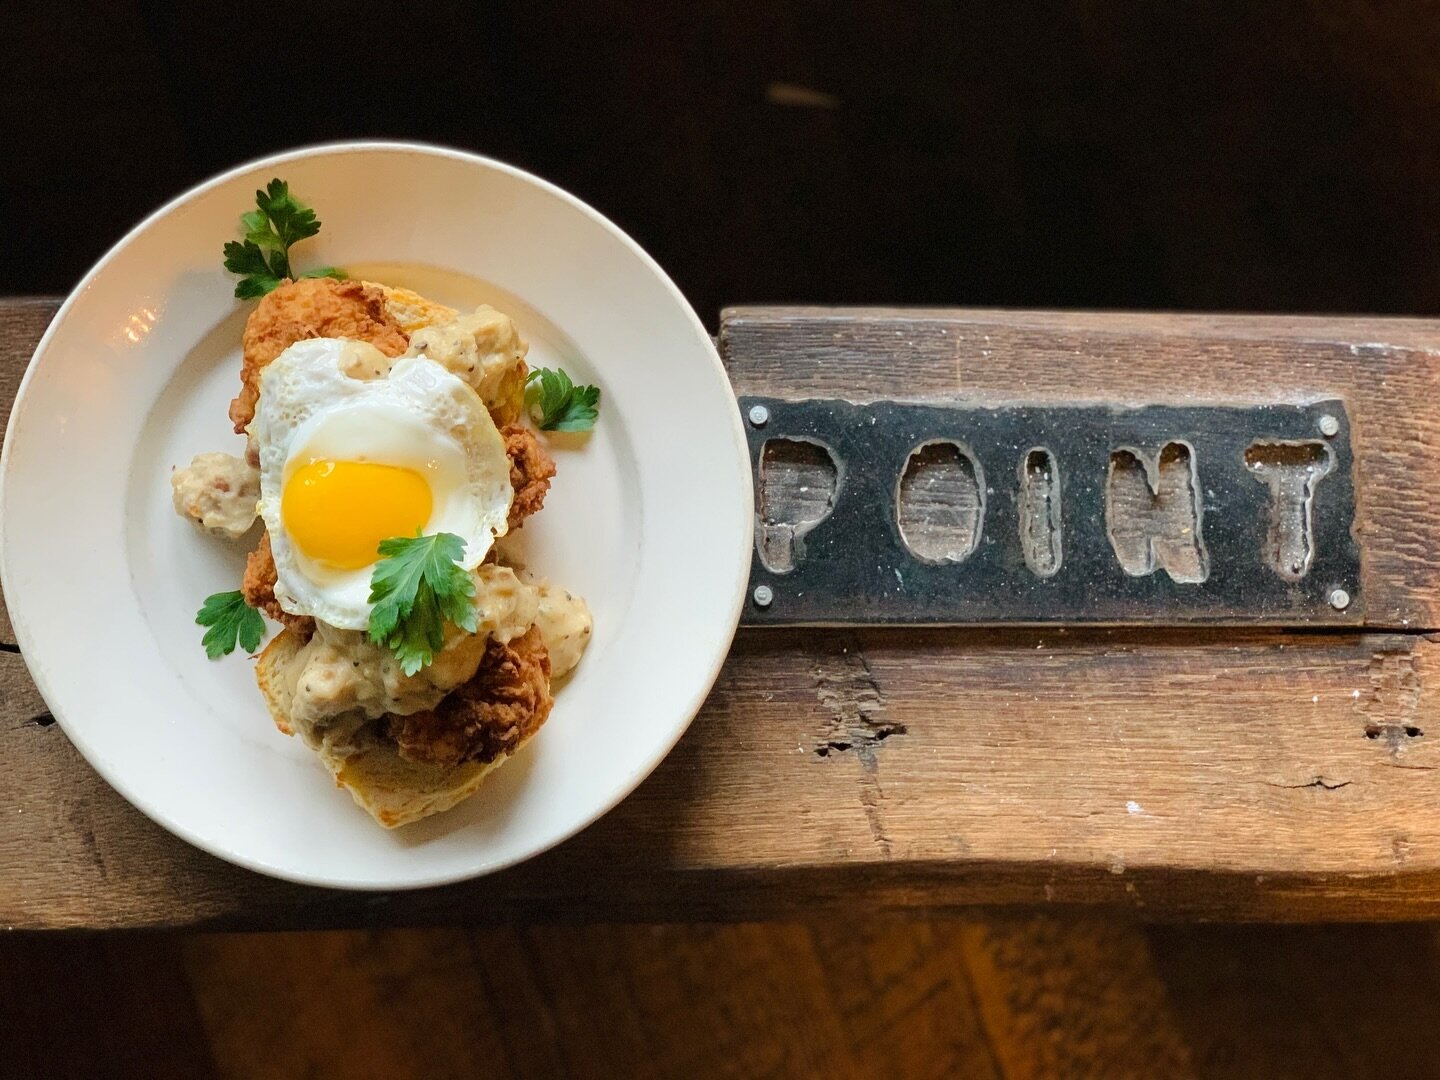 Have you made your Easter Brunch reservation yet? 🐰 from chicken &amp; waffles to carrot cake French toast we have you covered! 🥚🍳 Reservarion link in bio! 🔗

📍The Point in Towson
🍔America comfort food with a twist! 
🥞Brunch, dinner, live musi